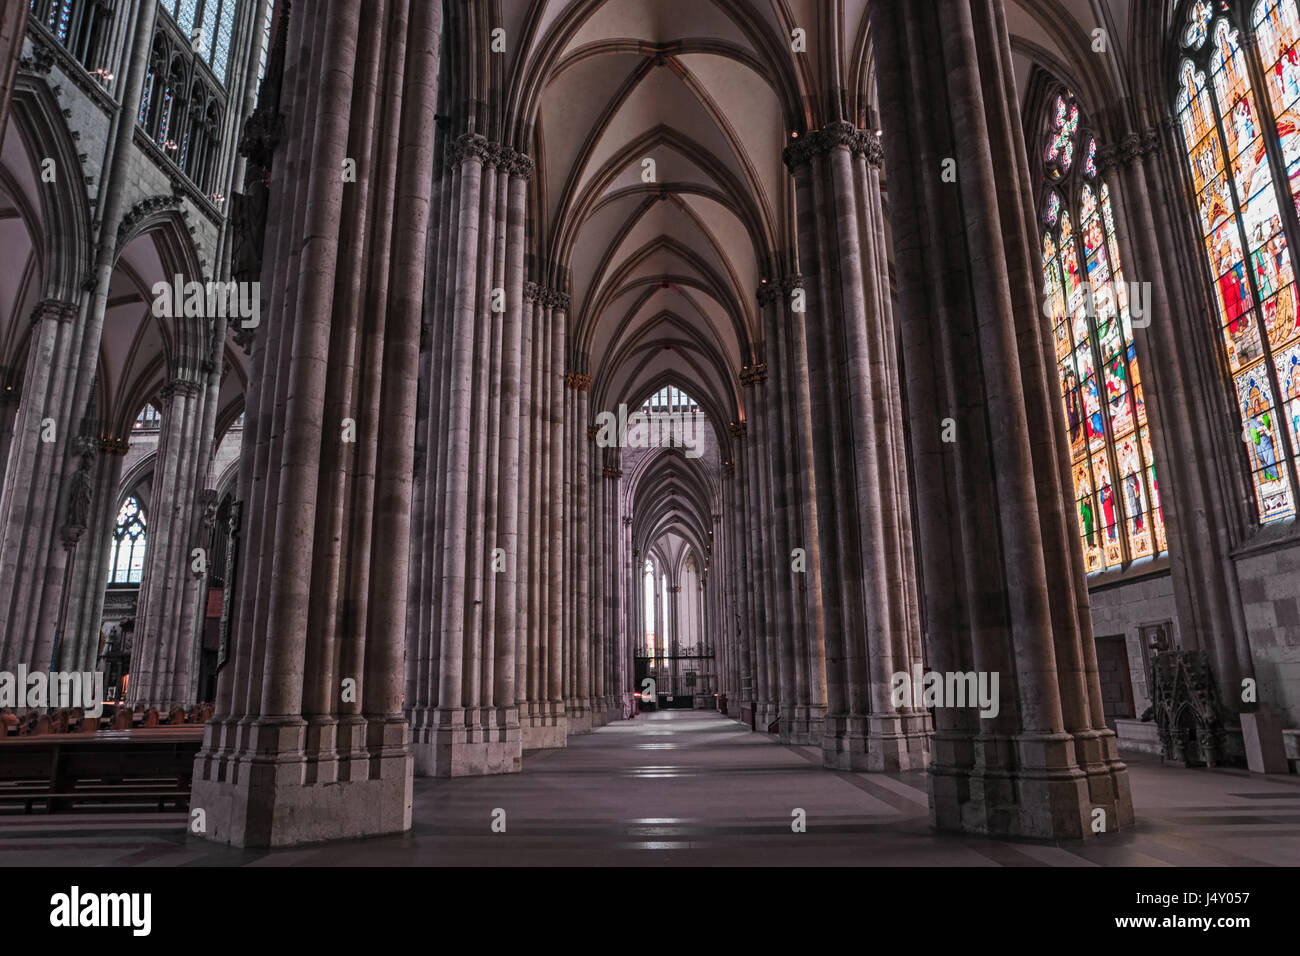 Cologne gothic cathedral interior, Germany, Europe. Famous monument and most visited place, symbol of Cologne. Inside Cologne Dom, nave, columns, stai Stock Photo